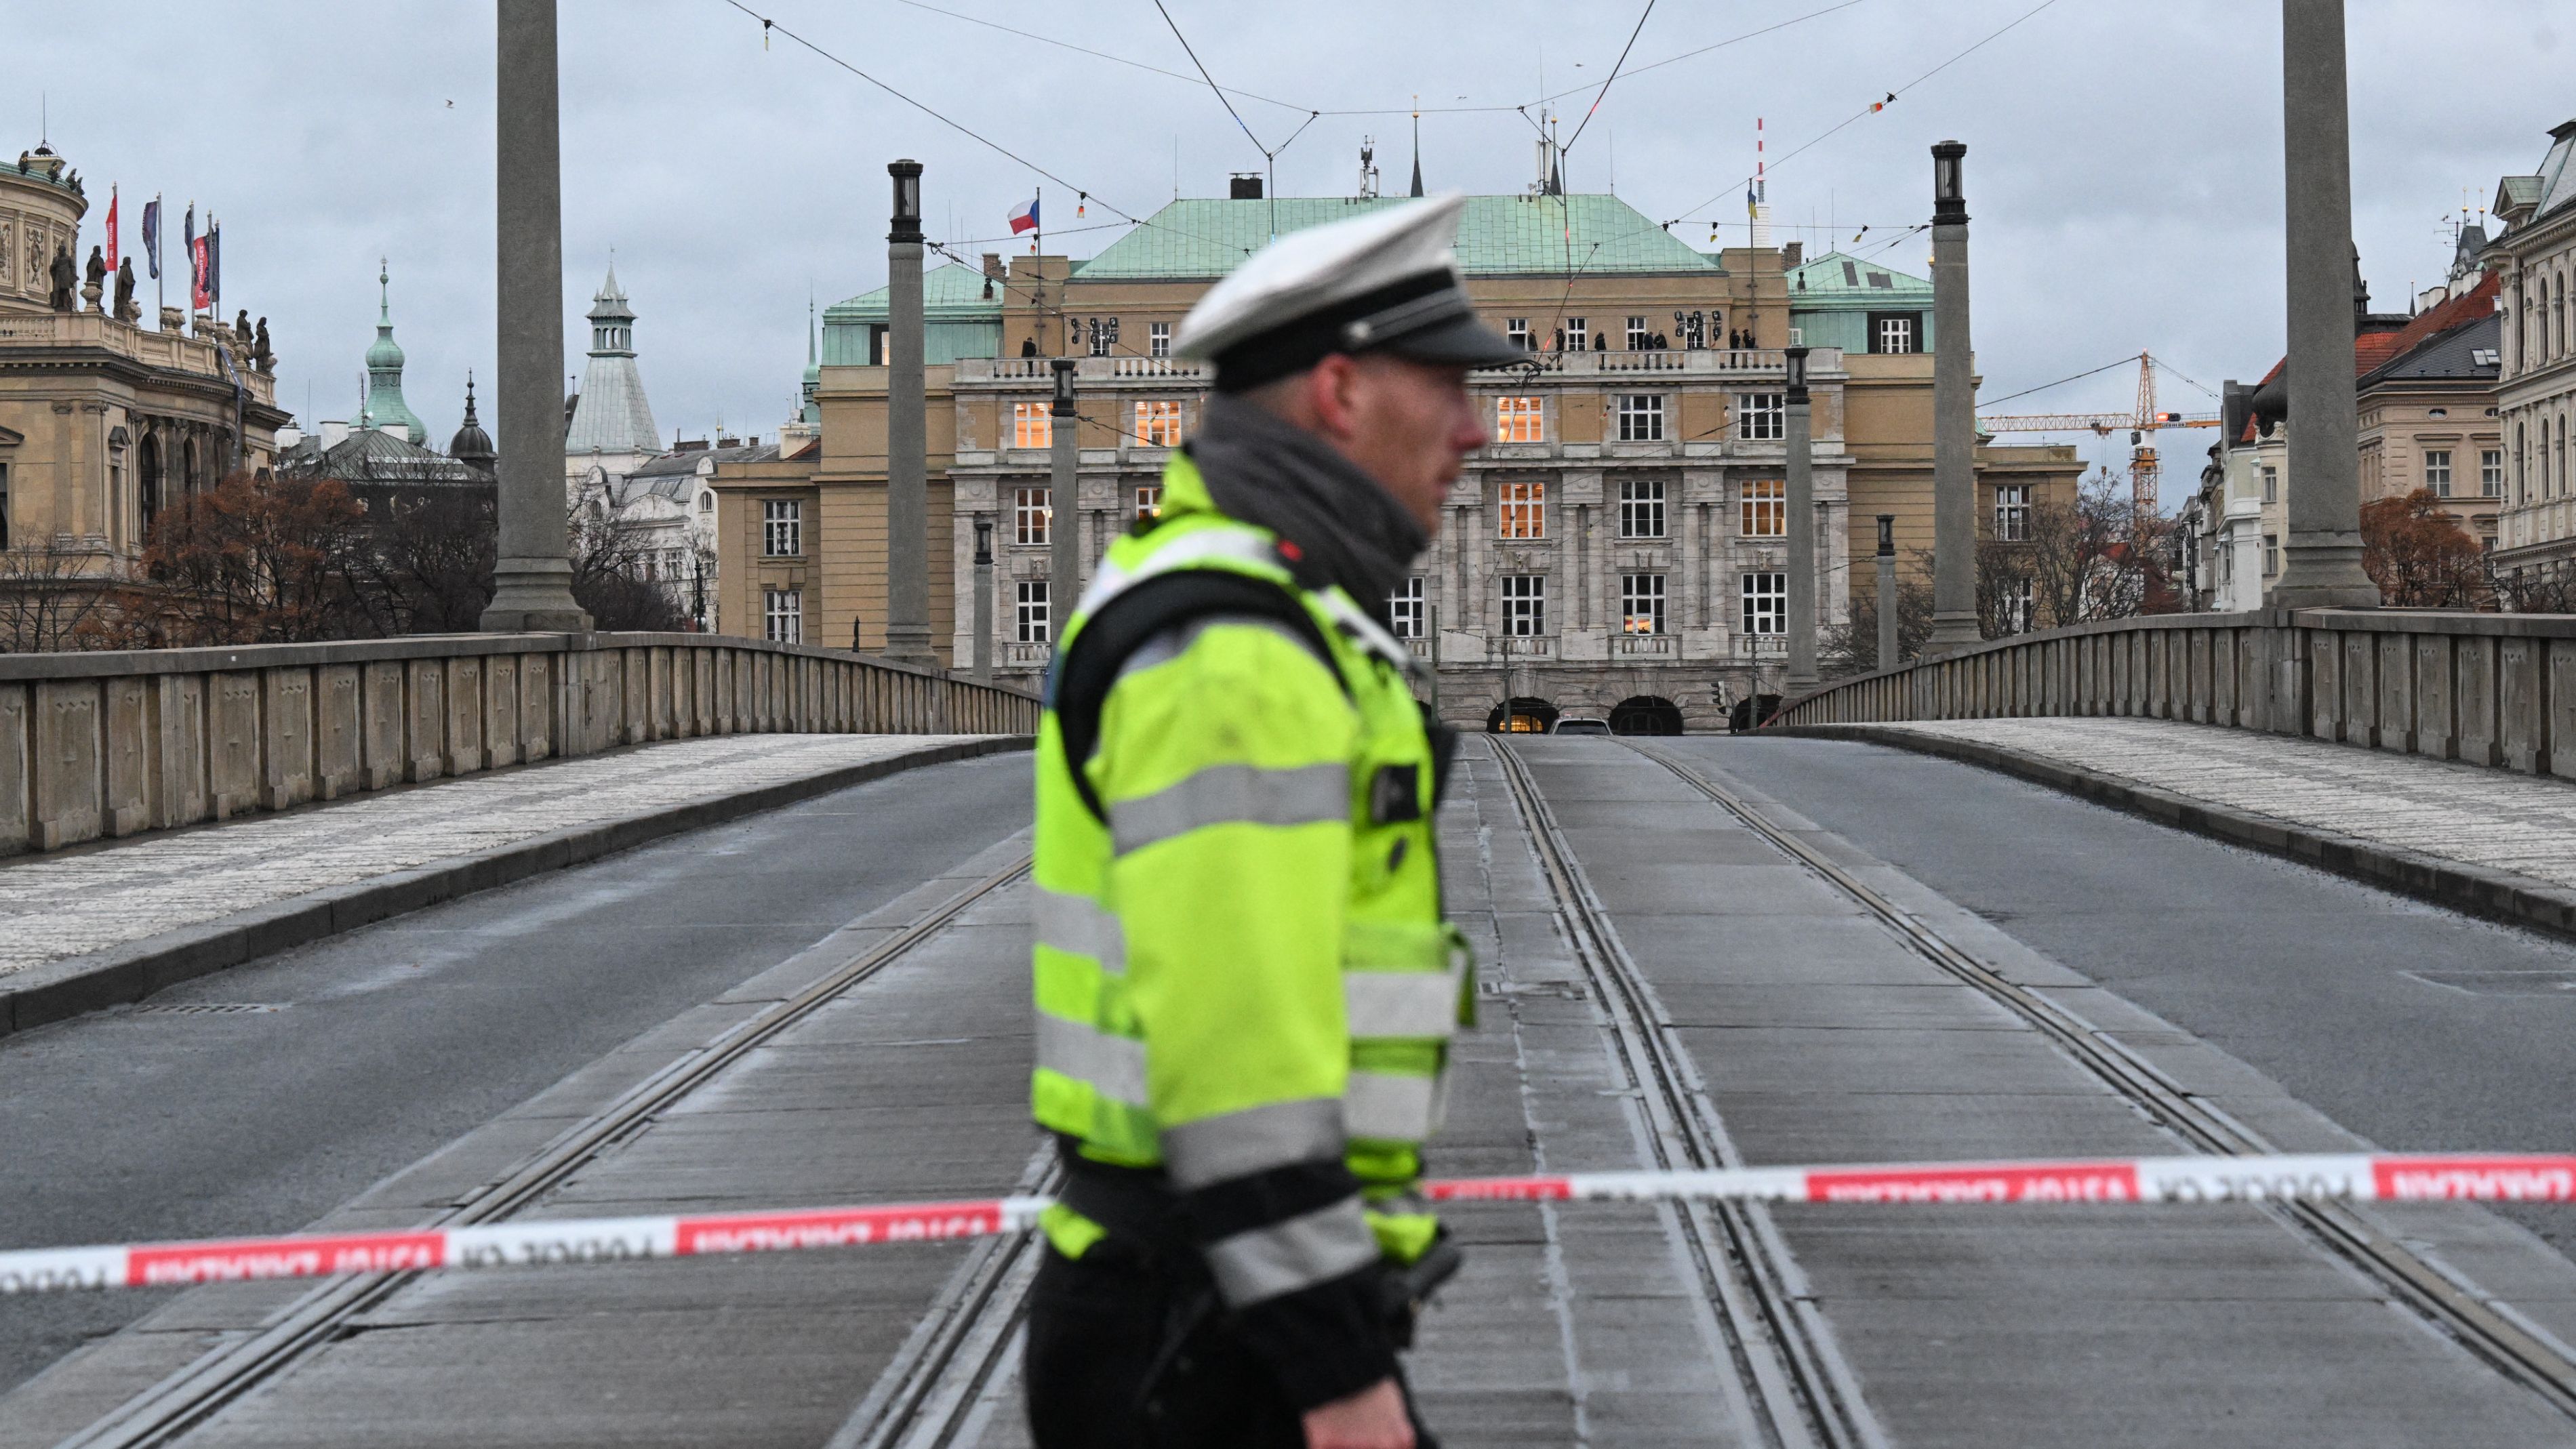 The shooting happened at the Charles University in central Prague. /Michal Cizek/AFP